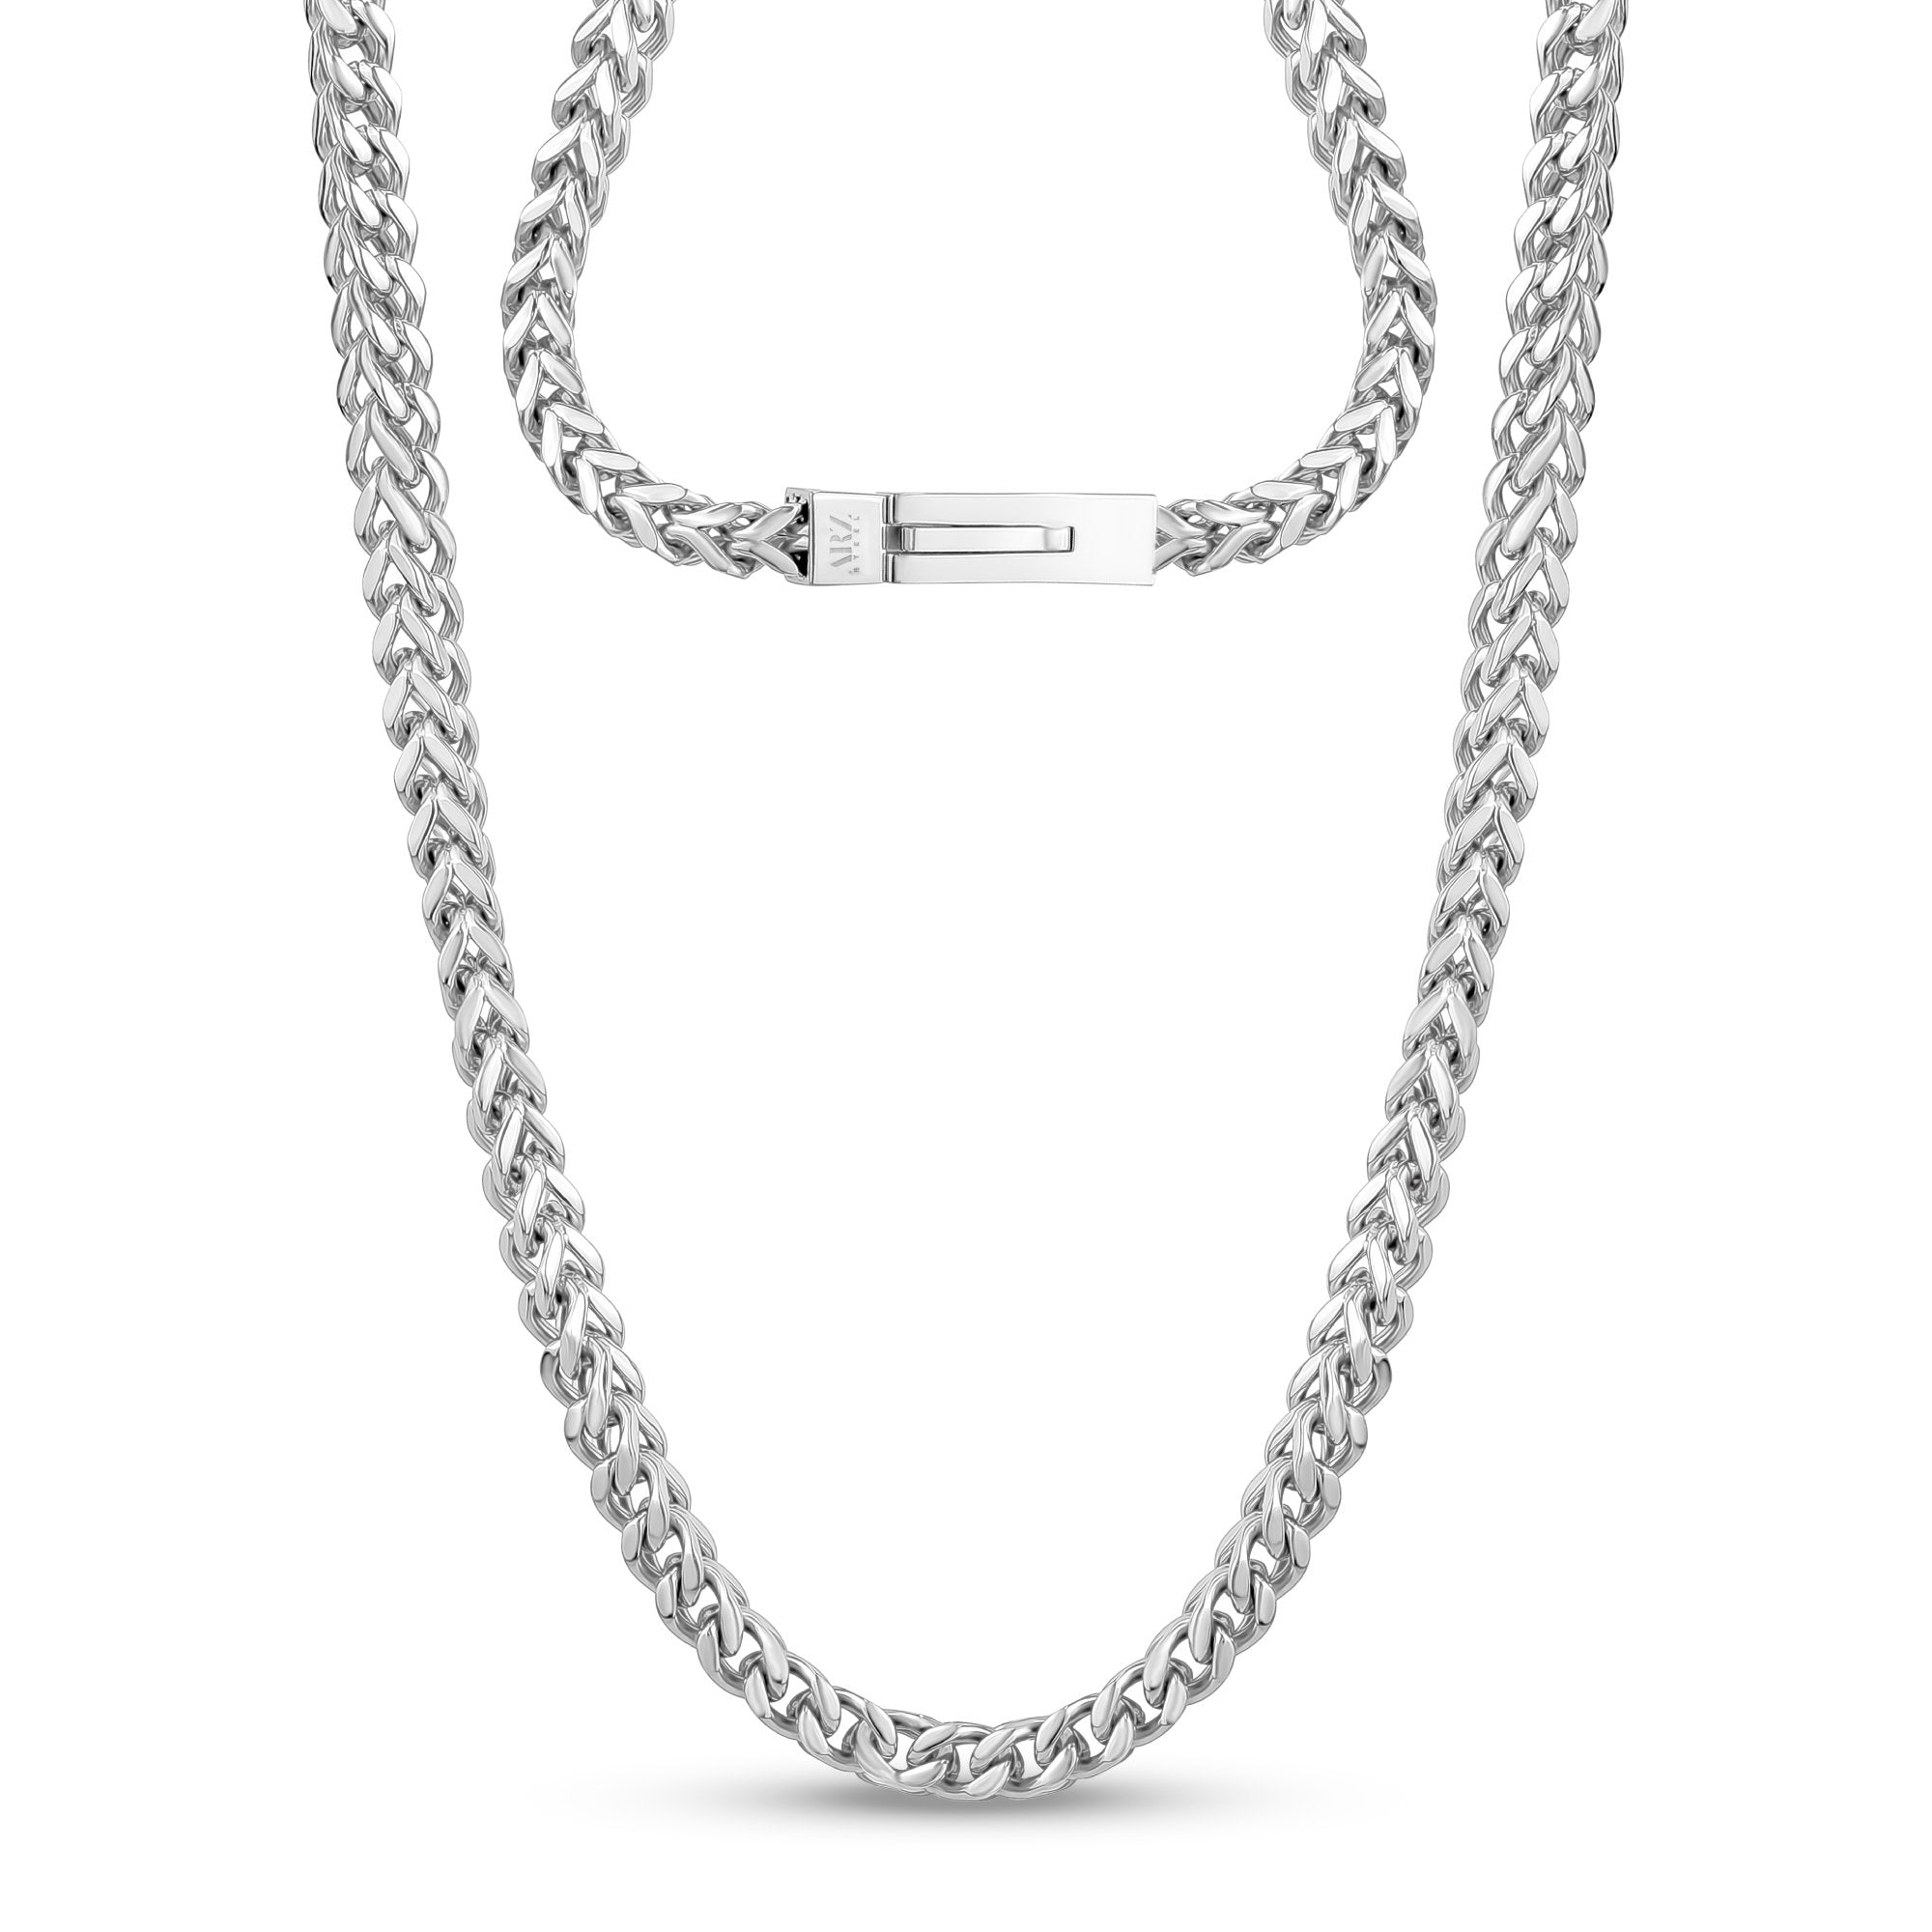 Mens 6mm Stainless Steel Polished Rounded Box Chain Necklace, 24